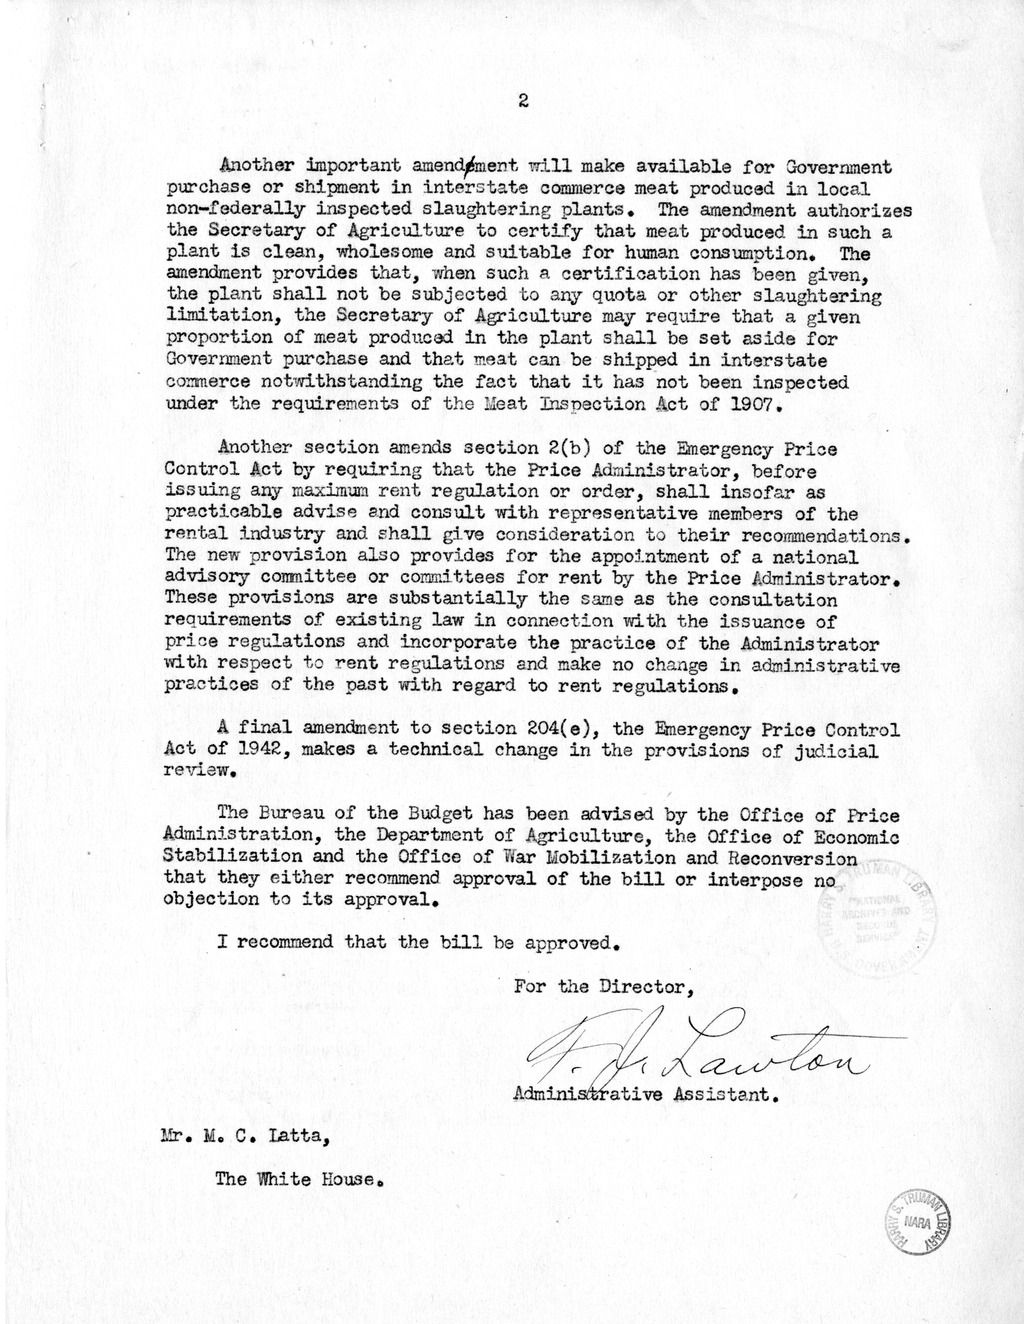 Memorandum from Frederick J. Lawton to M. C. Latta, S.J. Res. 30, Extending the Effective Period of the Emergency Price Control Act of 1942 and the Stabilization Act of 1942, with Attachments